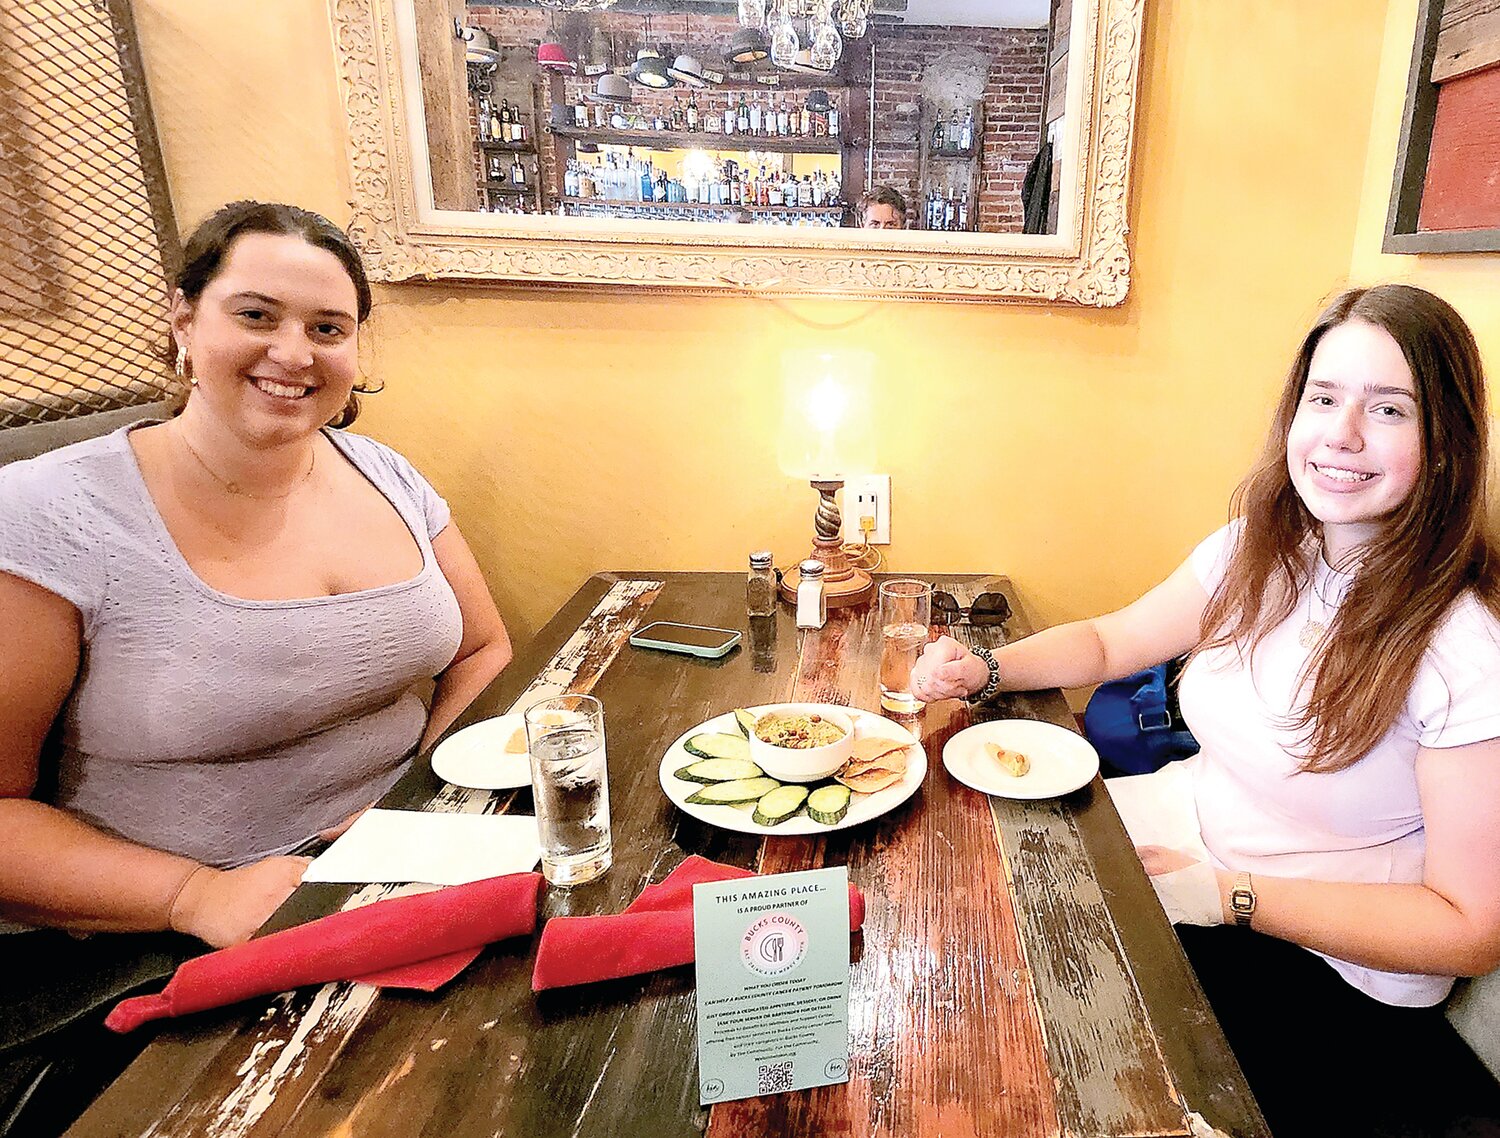 Olivia, left, and Brooke, right, enjoy a Hummus Verde Plate at The Hattery in Doylestown. The Hattery is one of 31 restaurants and bars participting in Bucks County Eat, Drink an Be Merry Month to benefit Kin Wellness and Support Center.